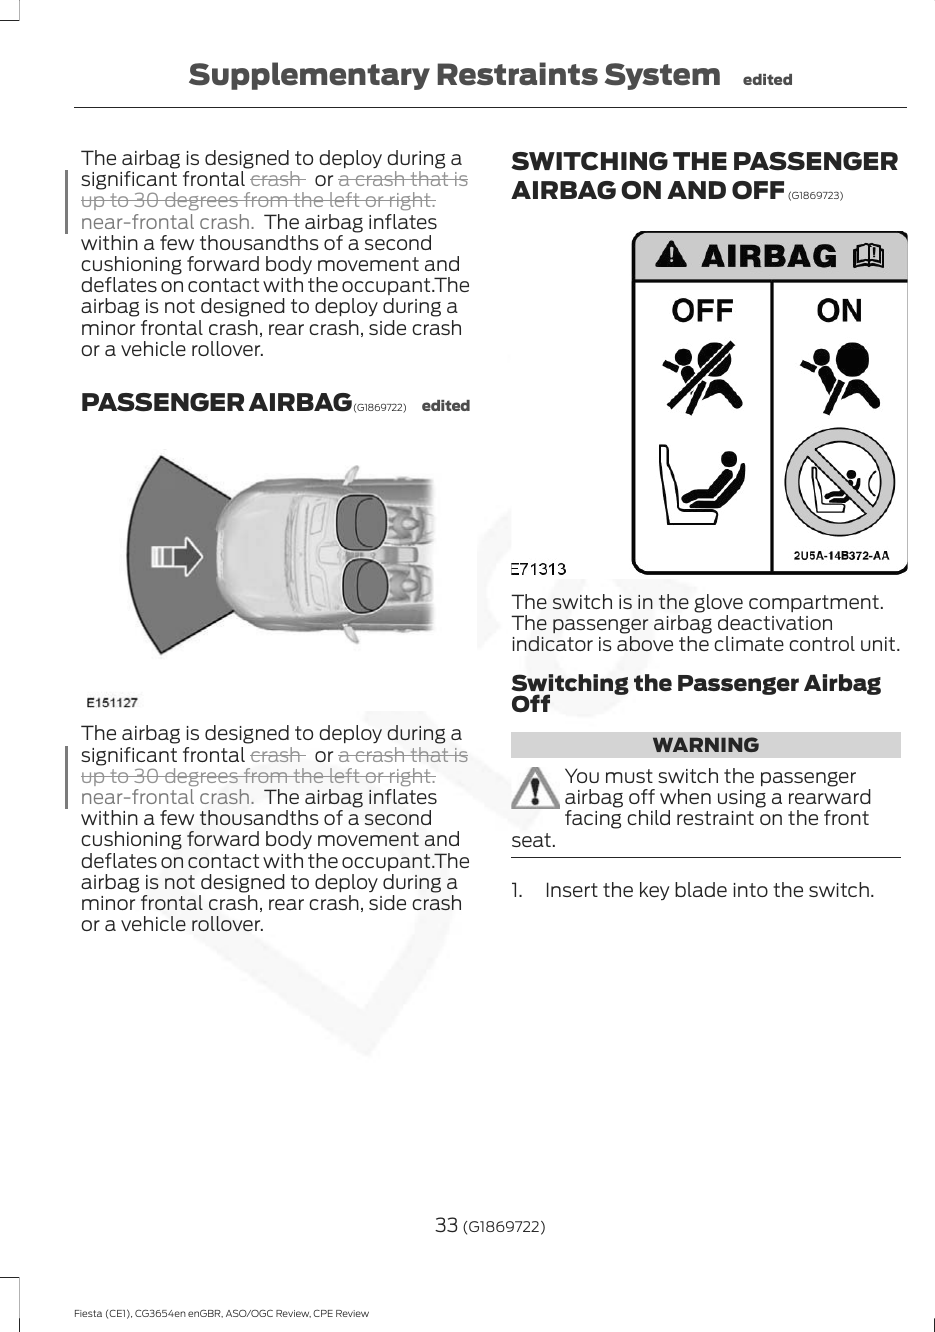 The airbag is designed to deploy during asignificant frontal crash   or a crash that isup to 30 degrees from the left or right.near-frontal crash. The airbag inflateswithin a few thousandths of a secondcushioning forward body movement anddeflates on contact with the occupant.Theairbag is not designed to deploy during aminor frontal crash, rear crash, side crashor a vehicle rollover.PASSENGER AIRBAG (G1869722) editedThe airbag is designed to deploy during asignificant frontal crash   or a crash that isup to 30 degrees from the left or right.near-frontal crash. The airbag inflateswithin a few thousandths of a secondcushioning forward body movement anddeflates on contact with the occupant.Theairbag is not designed to deploy during aminor frontal crash, rear crash, side crashor a vehicle rollover.SWITCHING THE PASSENGERAIRBAG ON AND OFF (G1869723)The switch is in the glove compartment.The passenger airbag deactivationindicator is above the climate control unit.Switching the Passenger AirbagOffWARNINGYou must switch the passengerairbag off when using a rearwardfacing child restraint on the frontseat.1. Insert the key blade into the switch.33 (G1869722)Fiesta (CE1), CG3654en enGBR, ASO/OGC Review, CPE ReviewSupplementary Restraints System edited